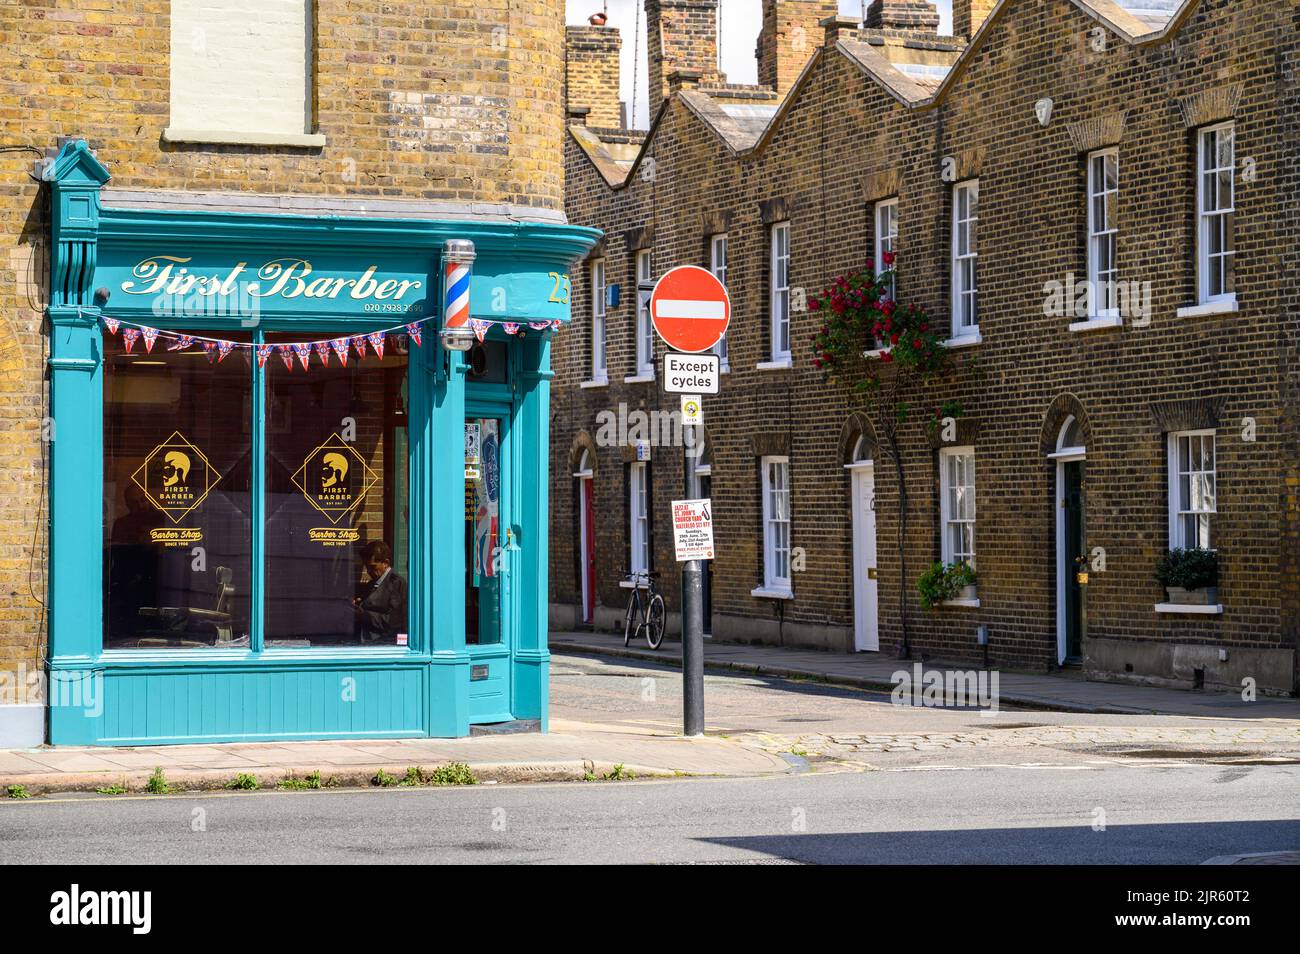 LONDON - May 20, 2022: Barber shop and No Entry road sign on corner of a street. Old brick terrace houses in background Stock Photo